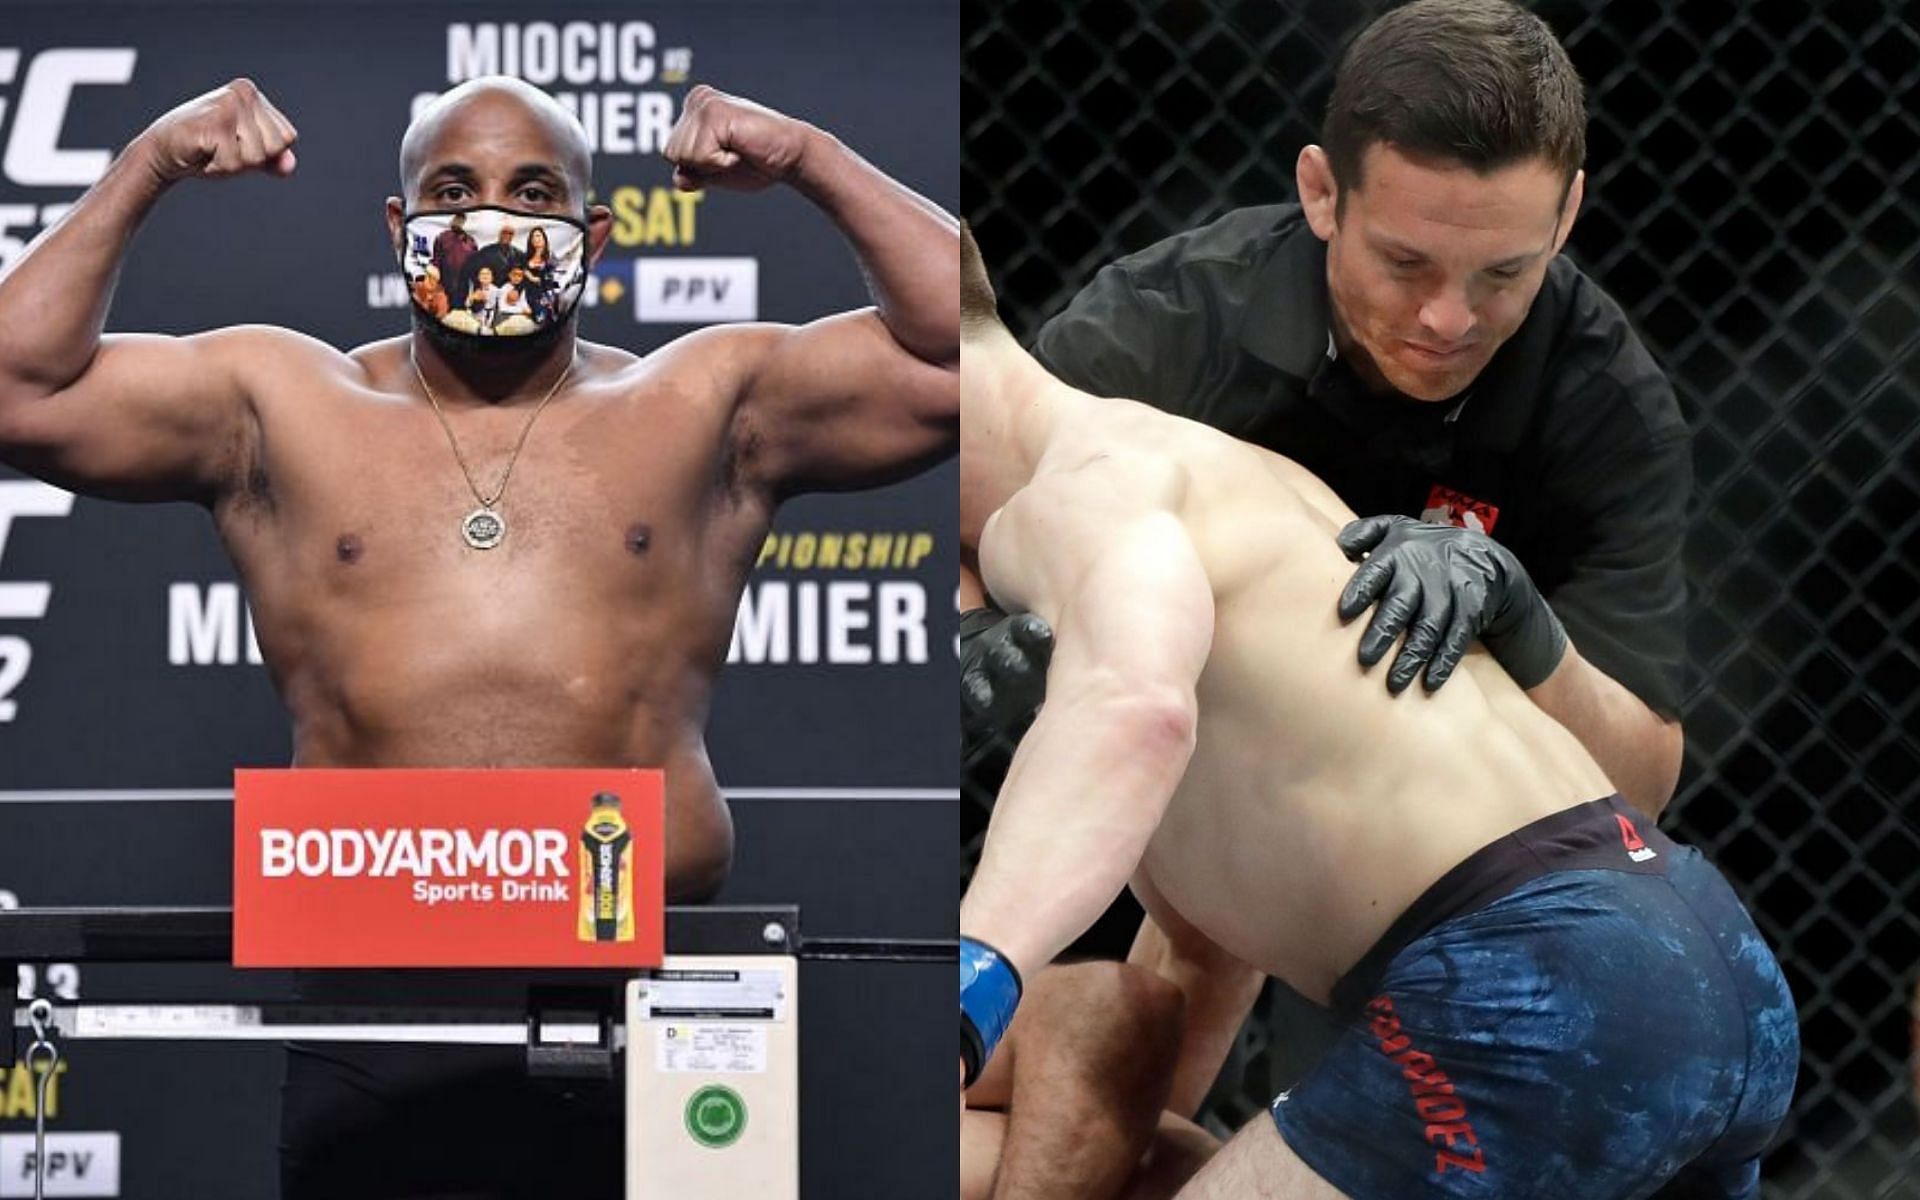 Daniel Cormier and Jason Herzog settle their recent dispute over eye pokes